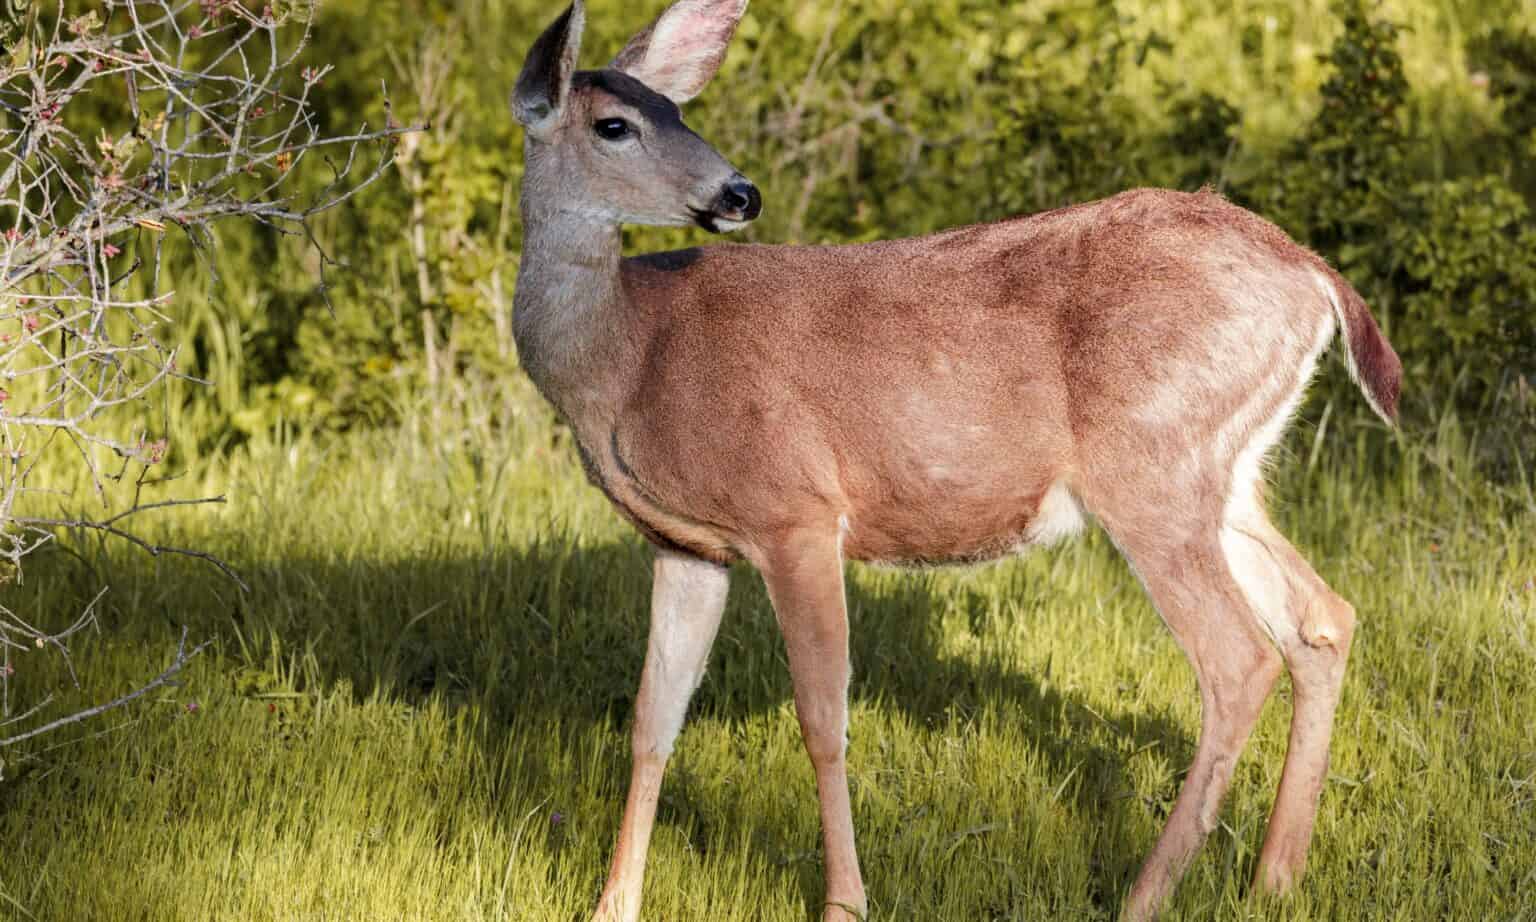 Deer Season In Hawaii: Everything You Need To Know To Be Prepared - A-Z ...